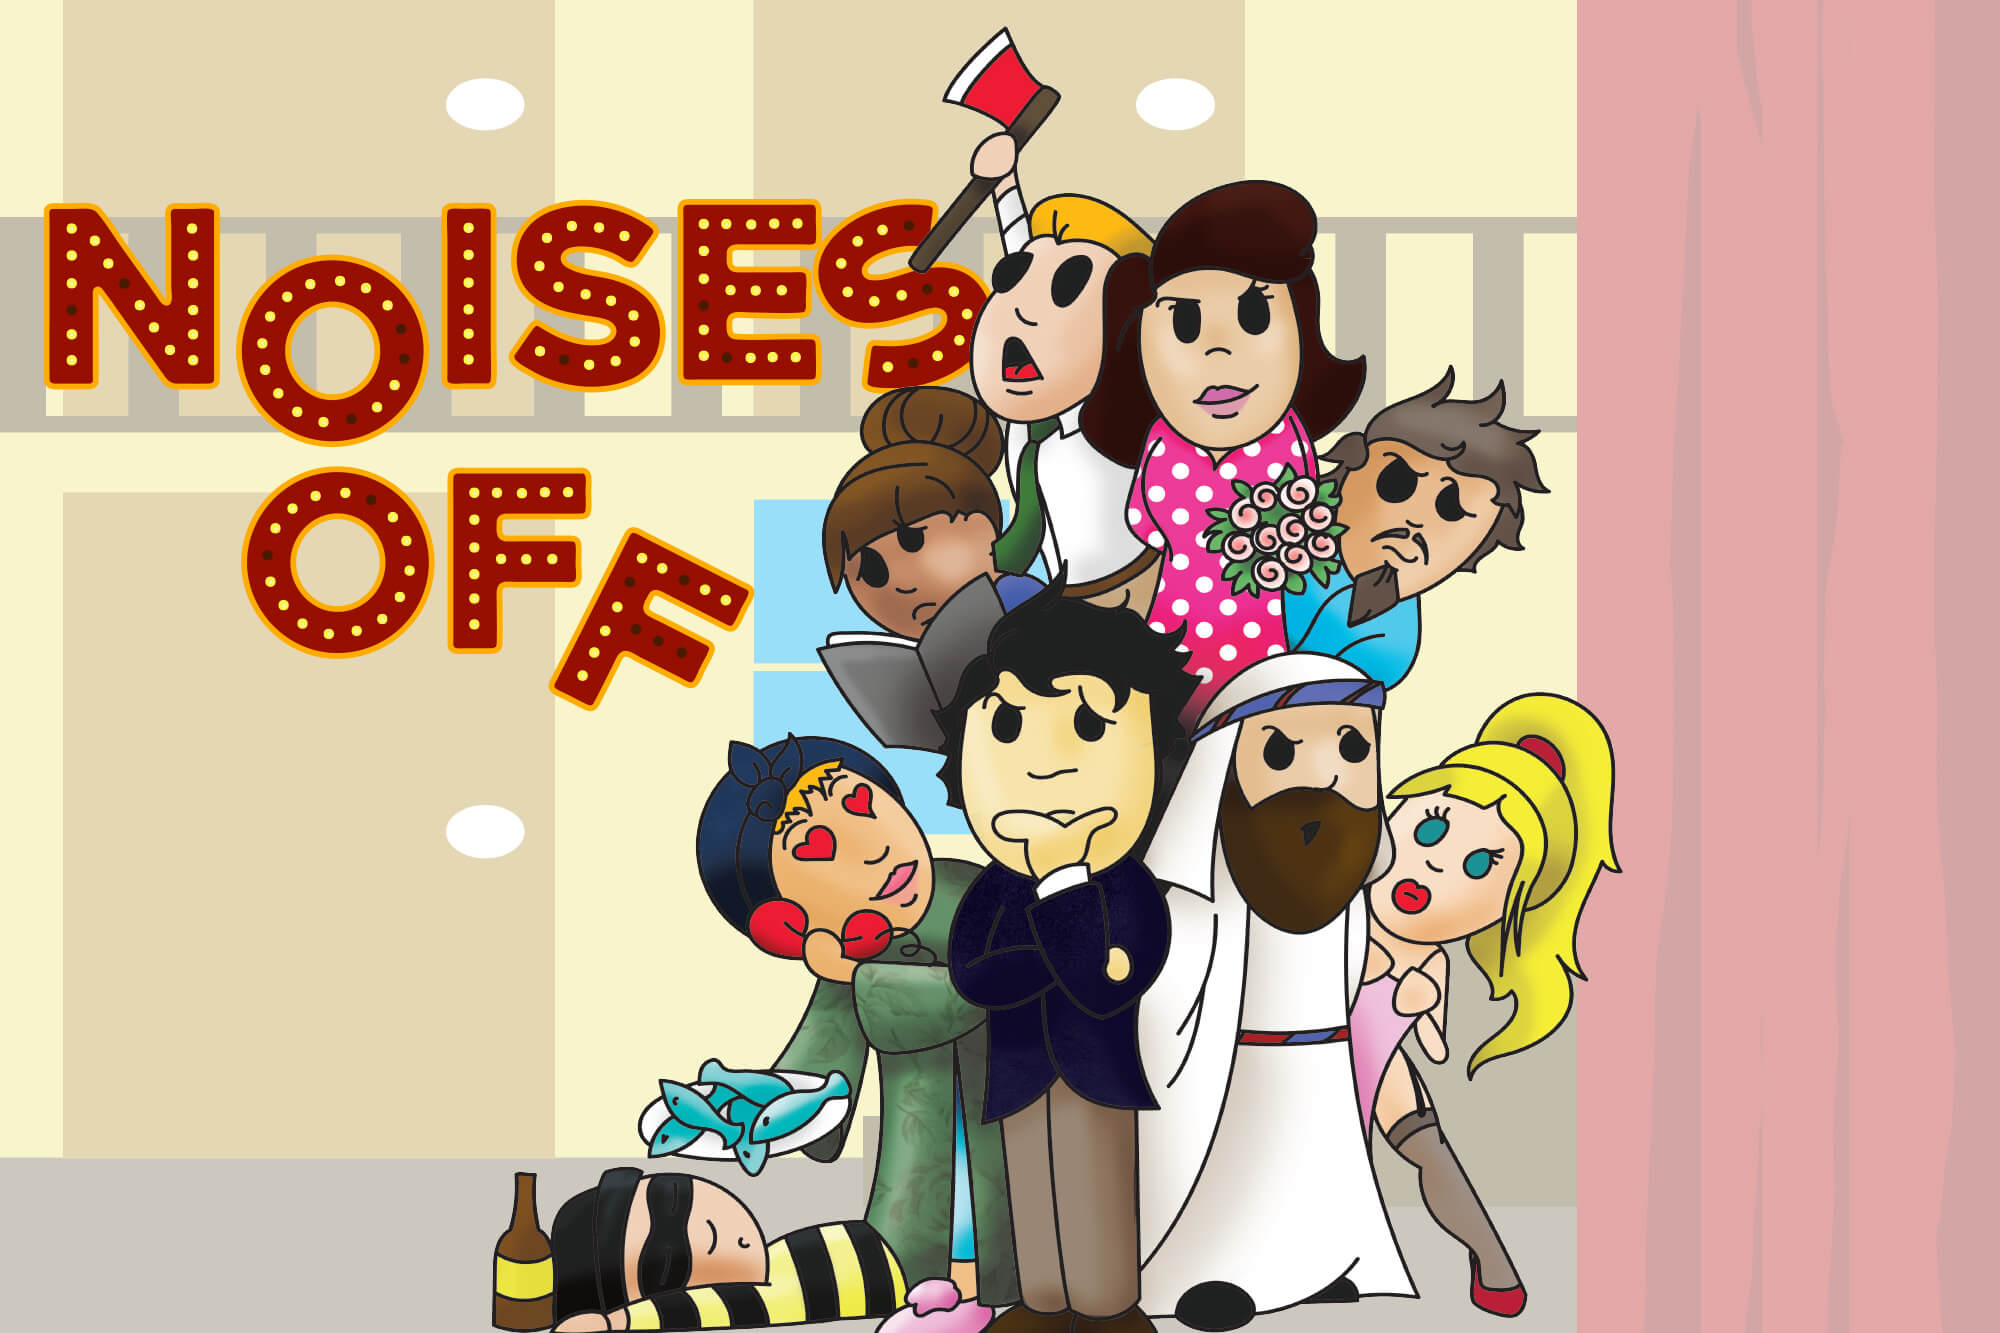 Poster image for Casper College production of "Noises Off."